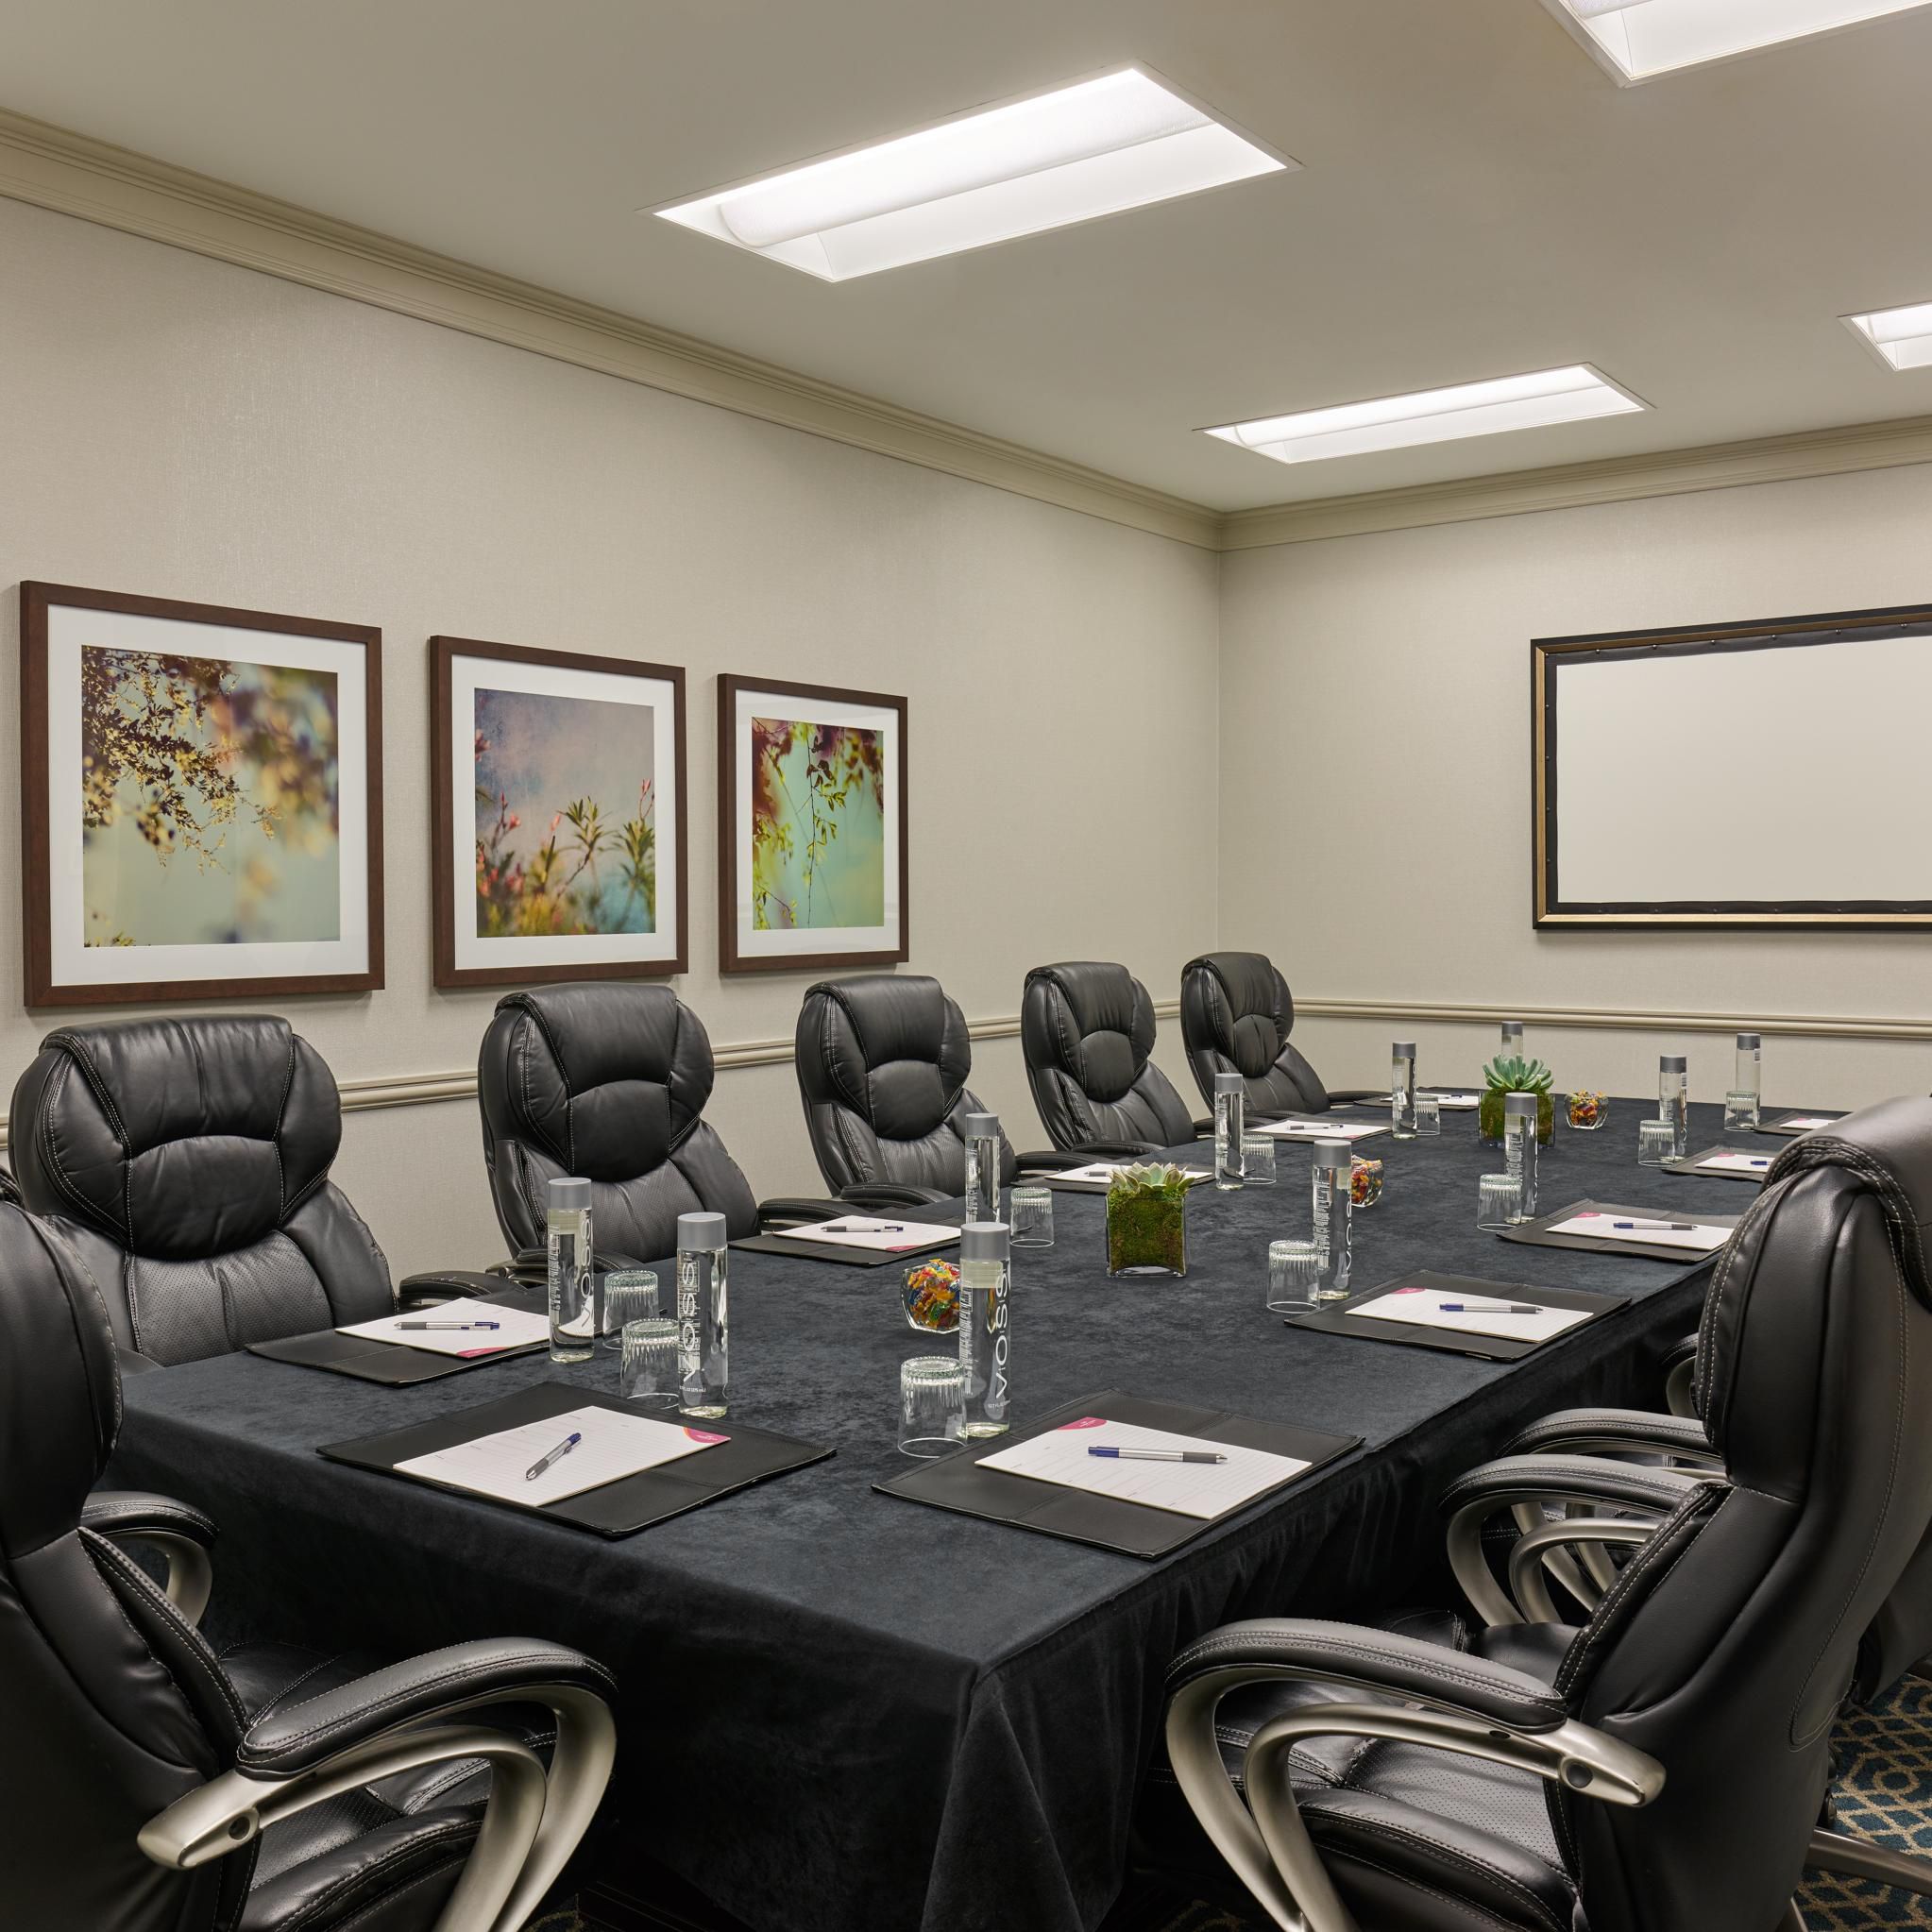 Royal Boardroom for up to 12 attendees.